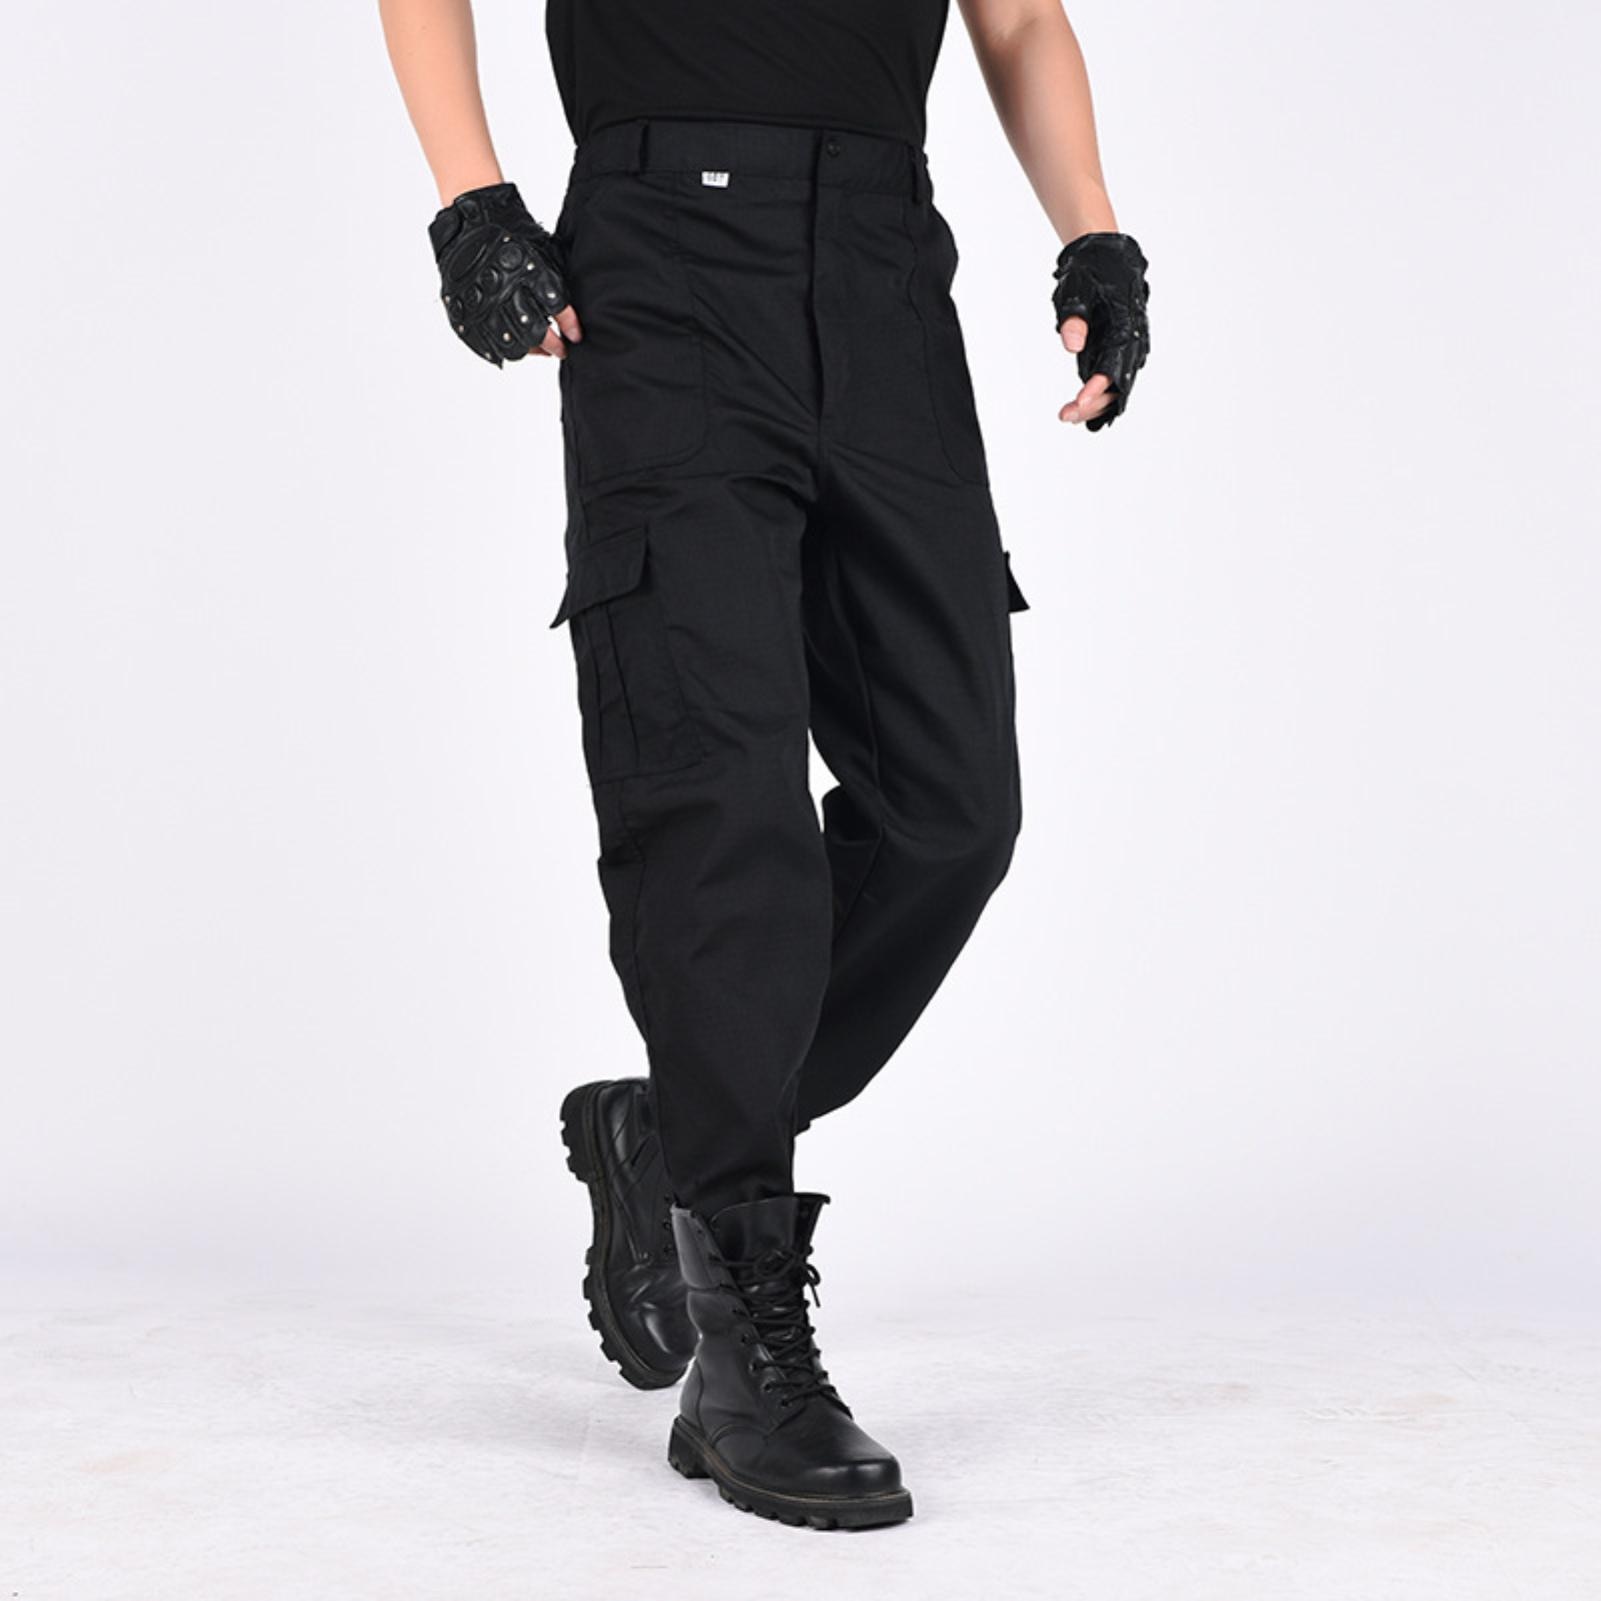 Summer Hottest Black Men's Light Weight Pants Men Solid Color Multi Pockets Training Long Cargo Pants Hiking Straight Trousers